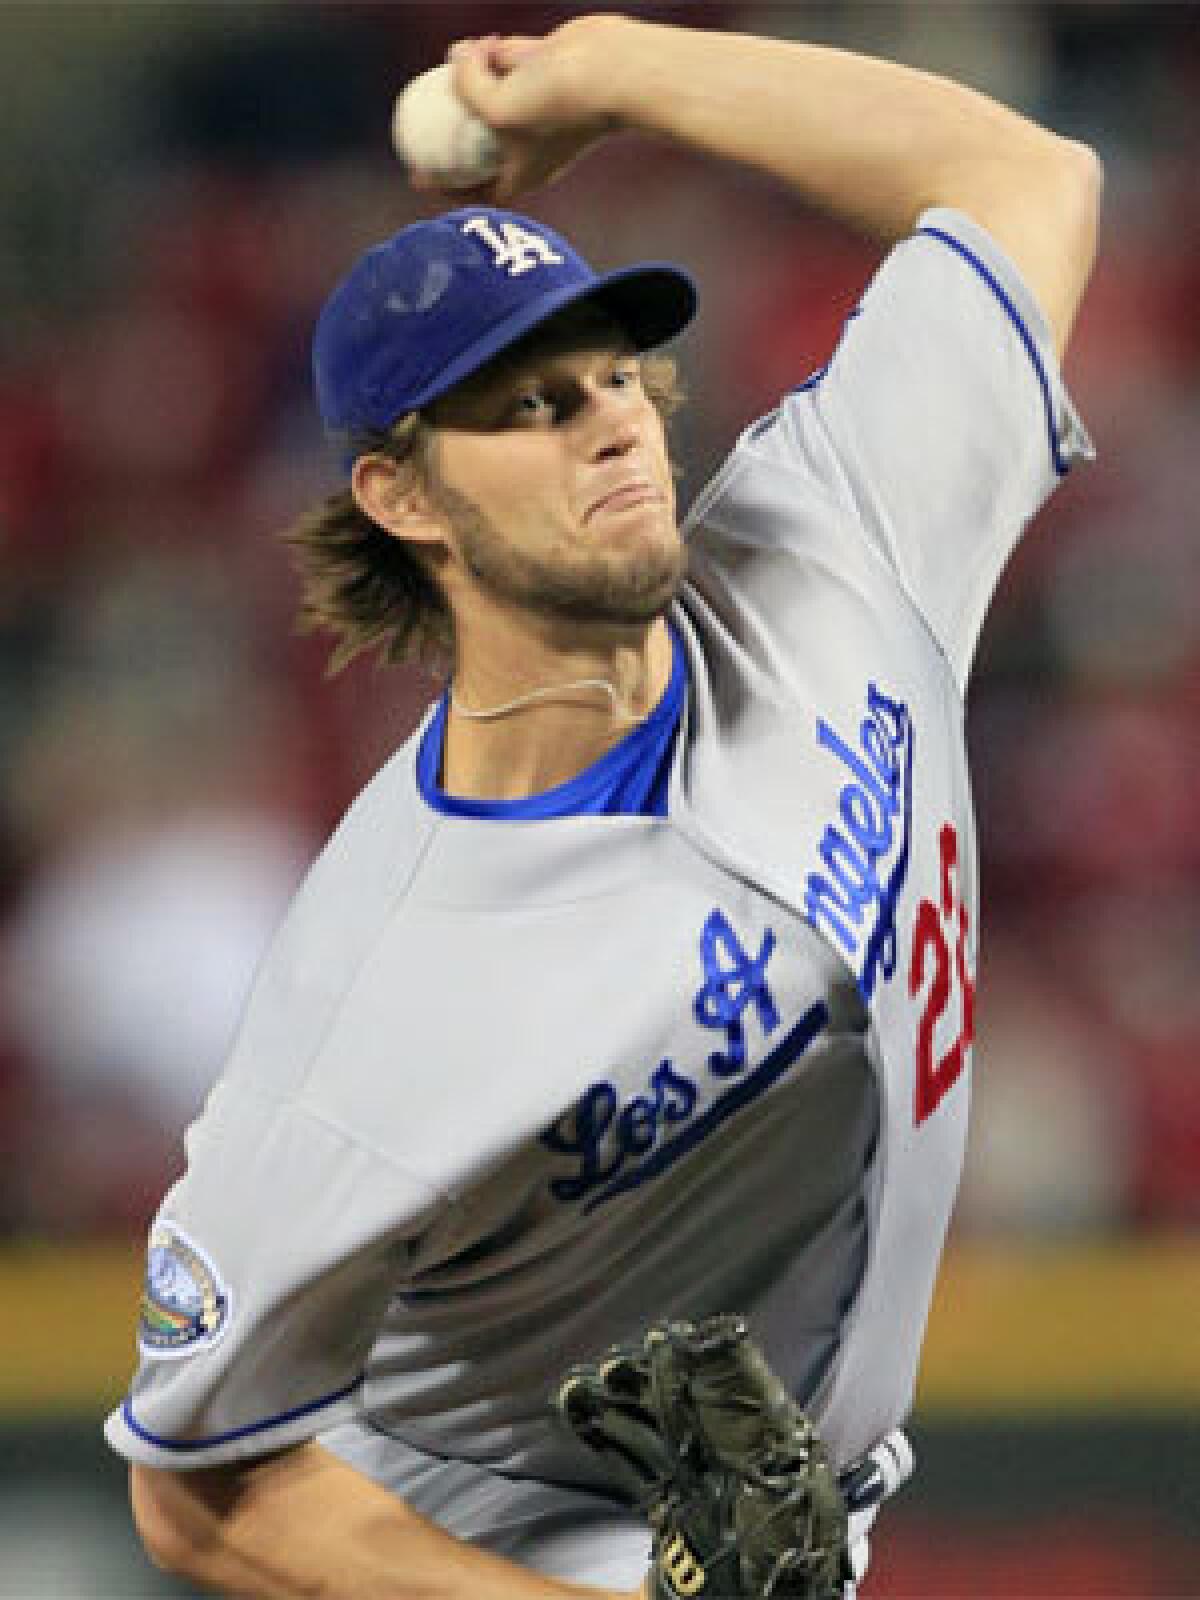 Clayton Kershaw is the ace of the Dodgers' rotation. Everything after that, however, is not so clear cut.